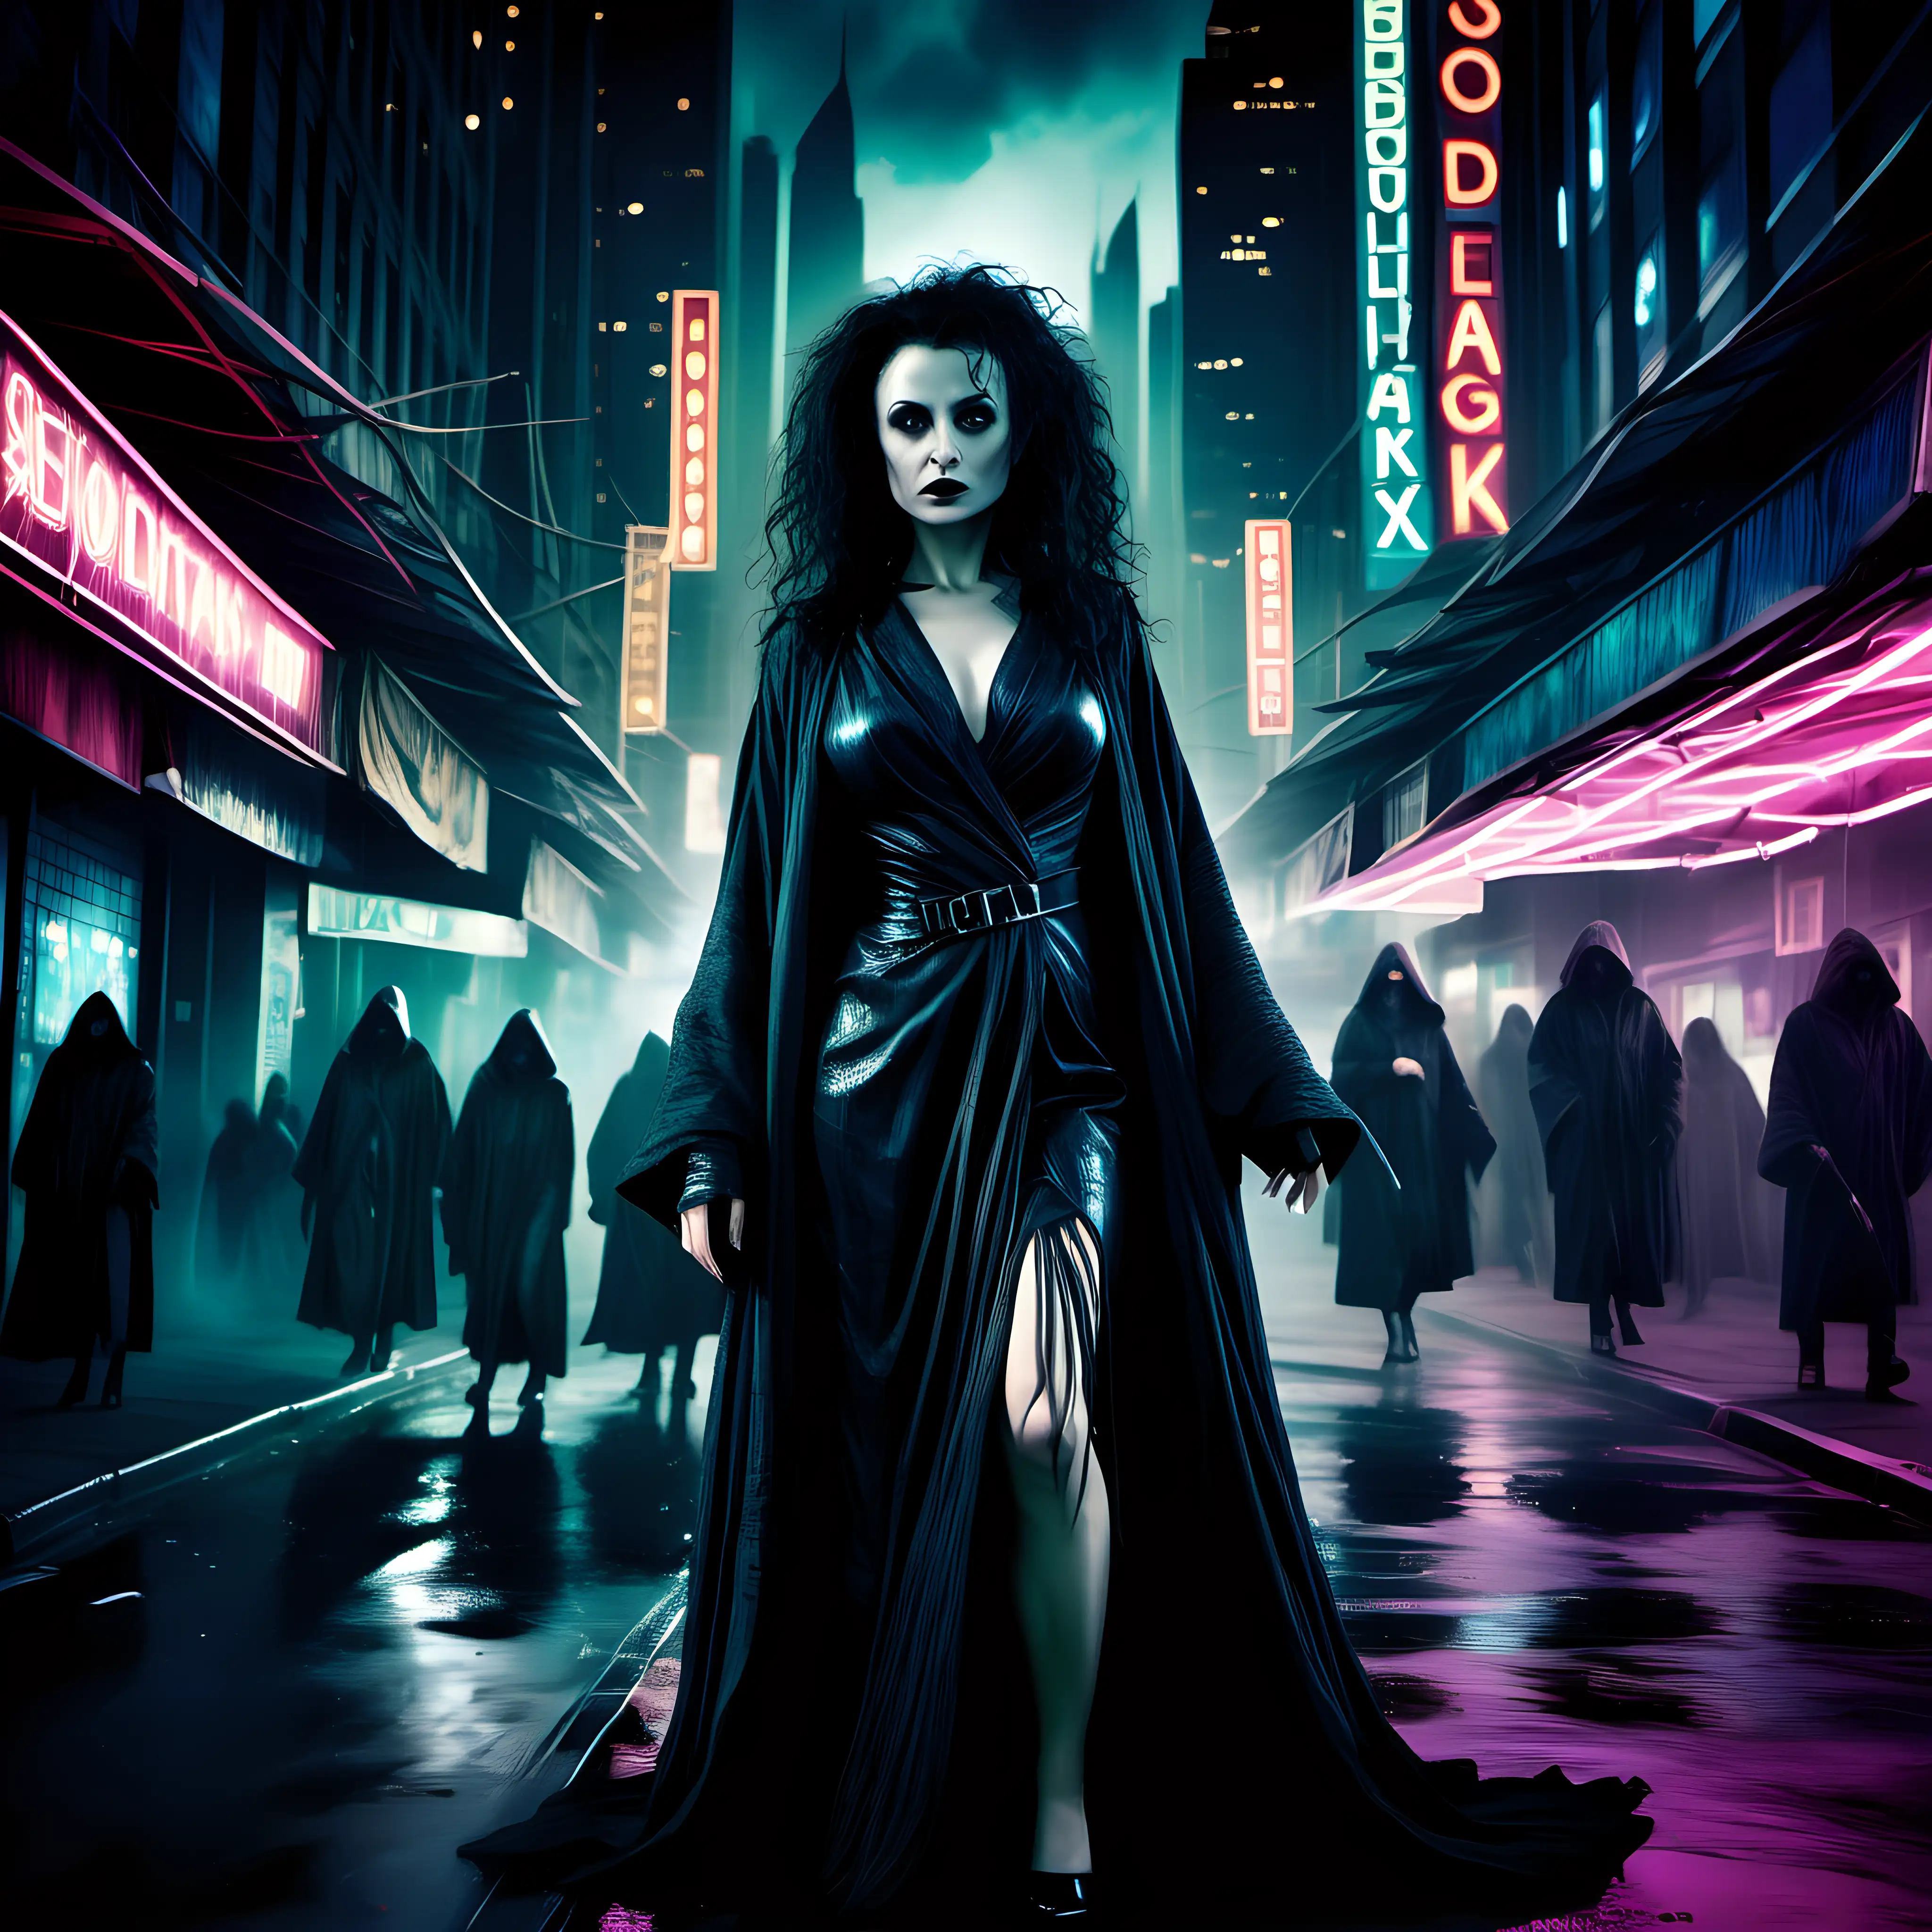  Bellatrix Lestrange, a notorious figure, sexy, and beautiful, sexy cloth, operates on the fringes of society. Cloaked in shadows and clad in dark, avant-garde robes, she prowls the neon-lit streets like a predator, commanding fear with her mastery of dark magic.
In this futuristic city, Bellatrix Lestrange brings her unique talents and personality, weaving a tapestry of magic, mystery, and adventure against the backdrop of neon-lit skyscrapers and bustling streets,  super realistic lighting, hyper-realistic super-detailed